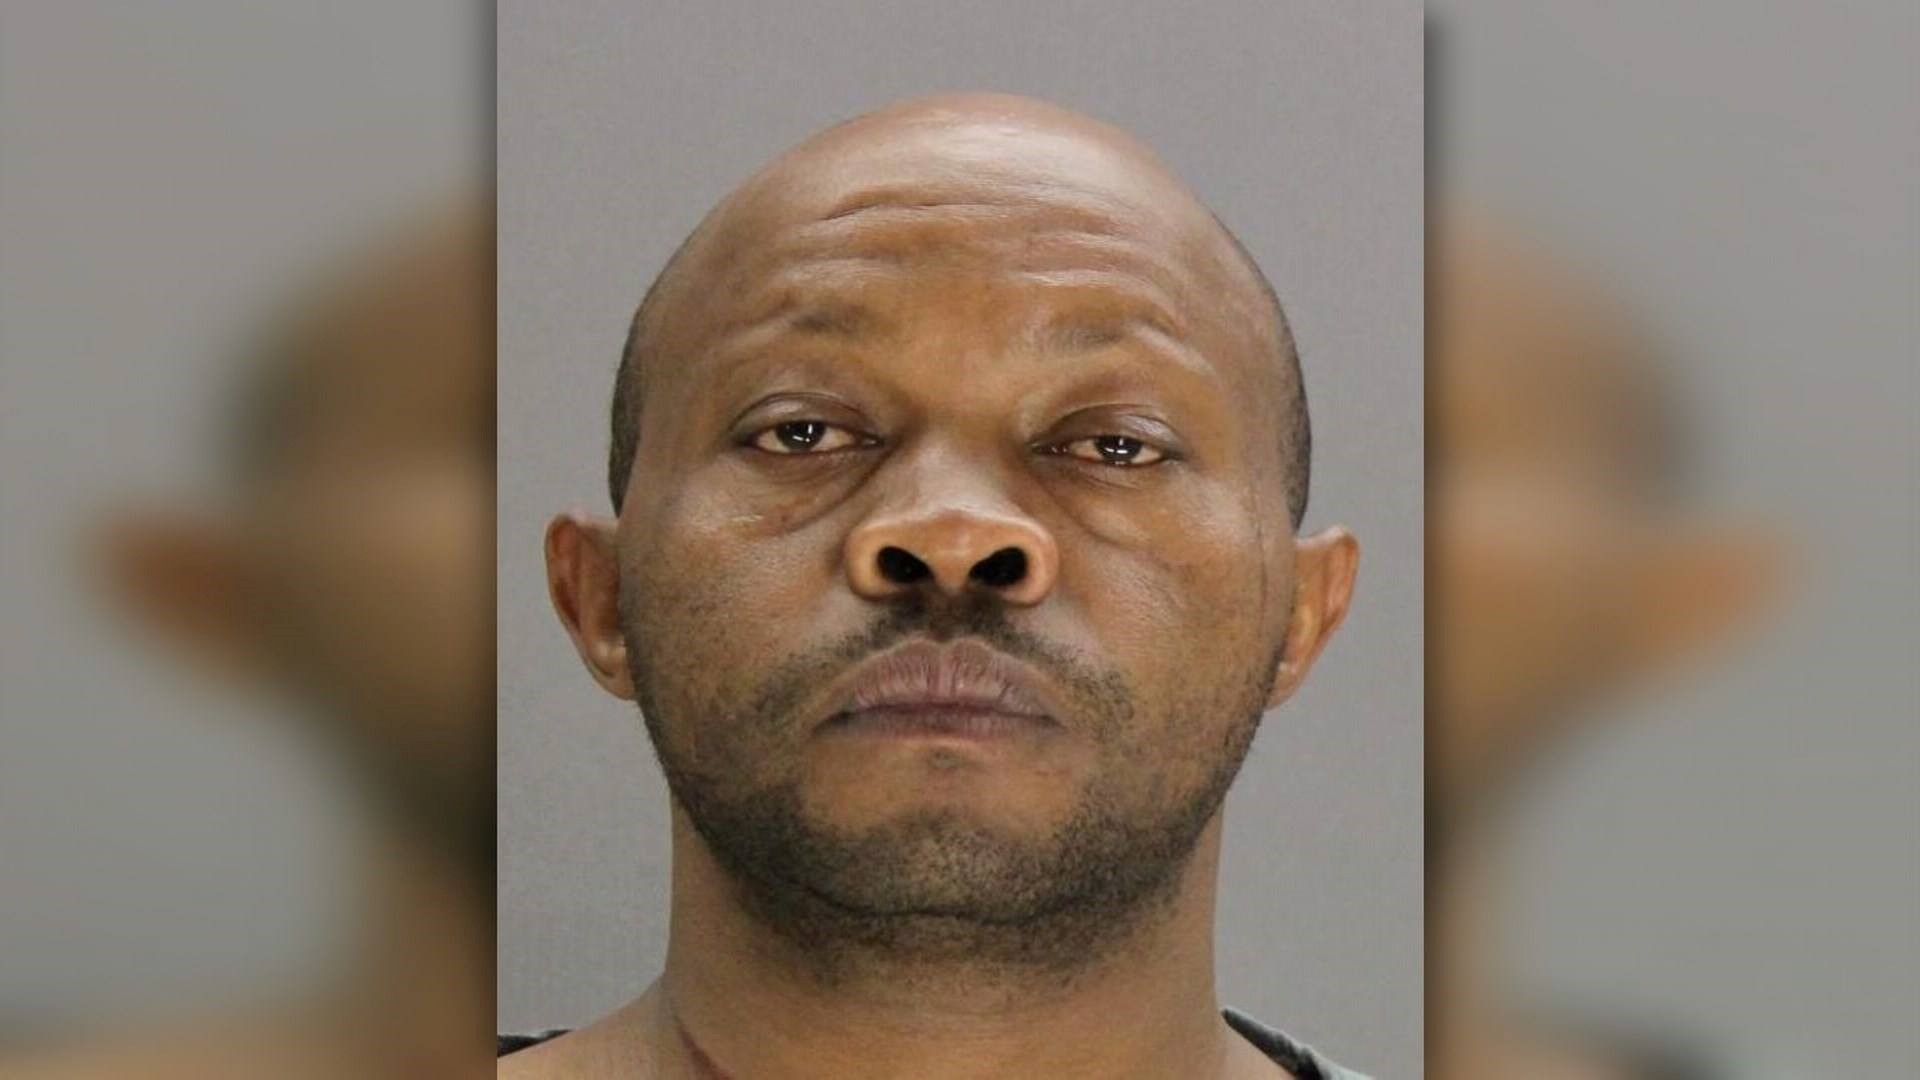 Billy Chemirmir, 46, is already charged with 12 murders. A lawsuit against a senior living center says he's also responsible for six others.